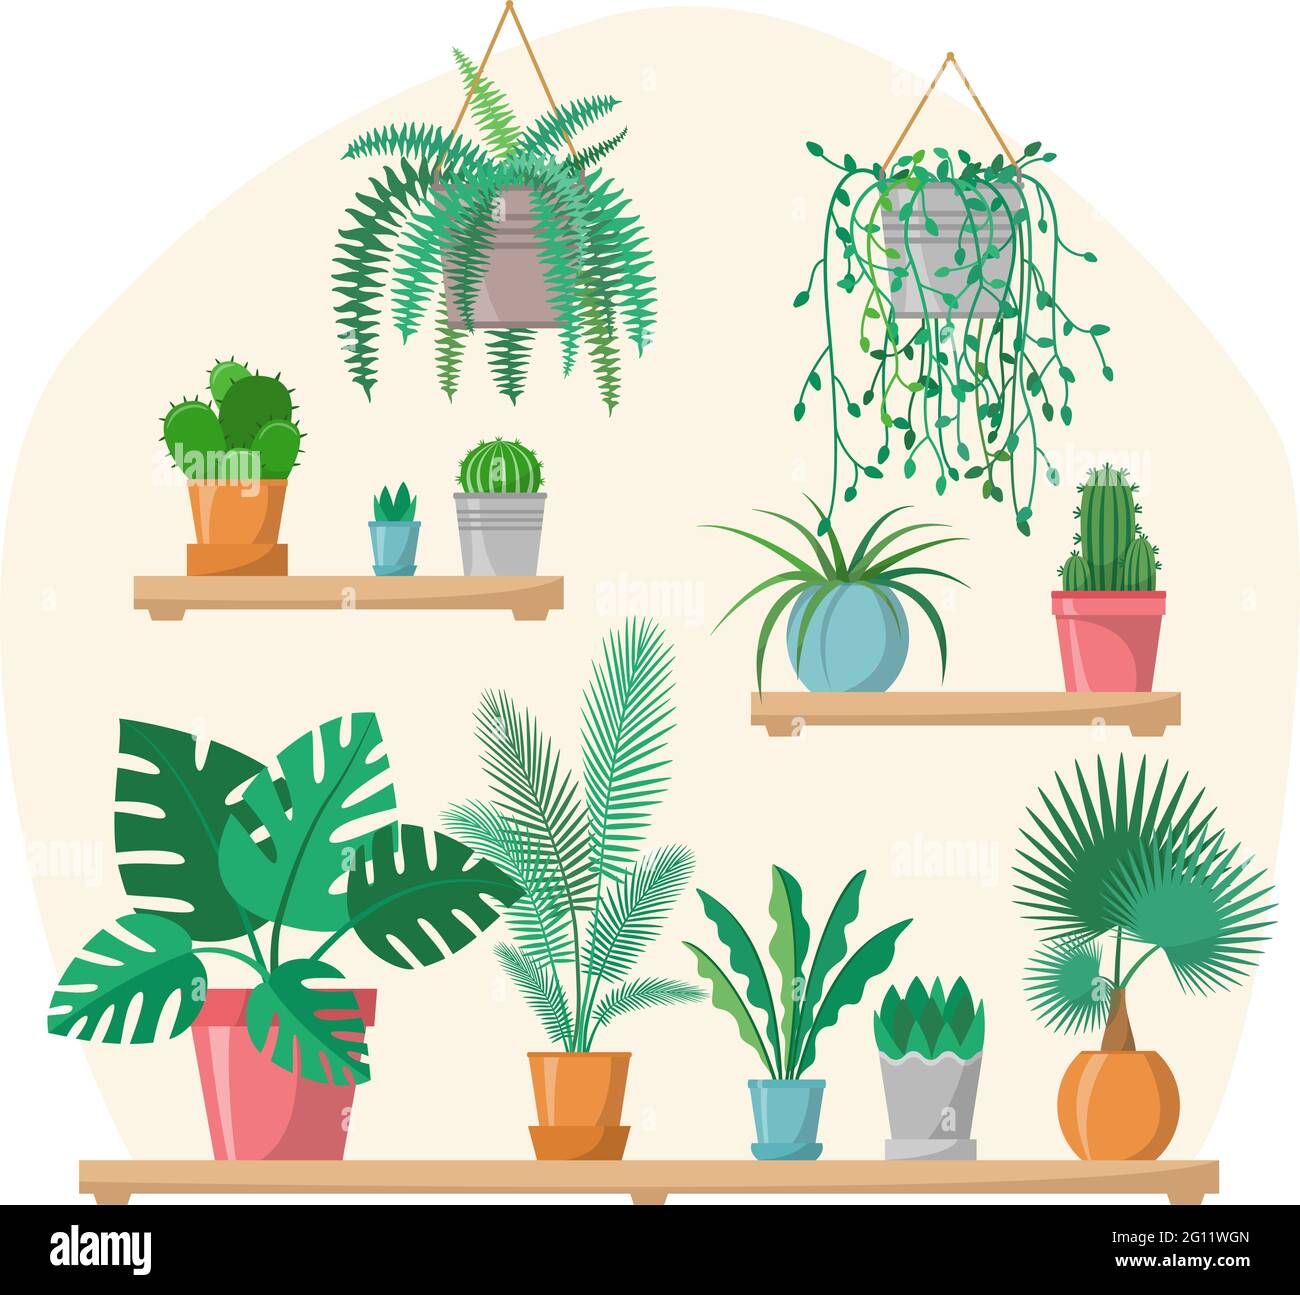 House plants collection in flat style with details, indoor home plants in colorful pots on shelves, green set, palms, cactus, fern, vector greenery il Stock Vector